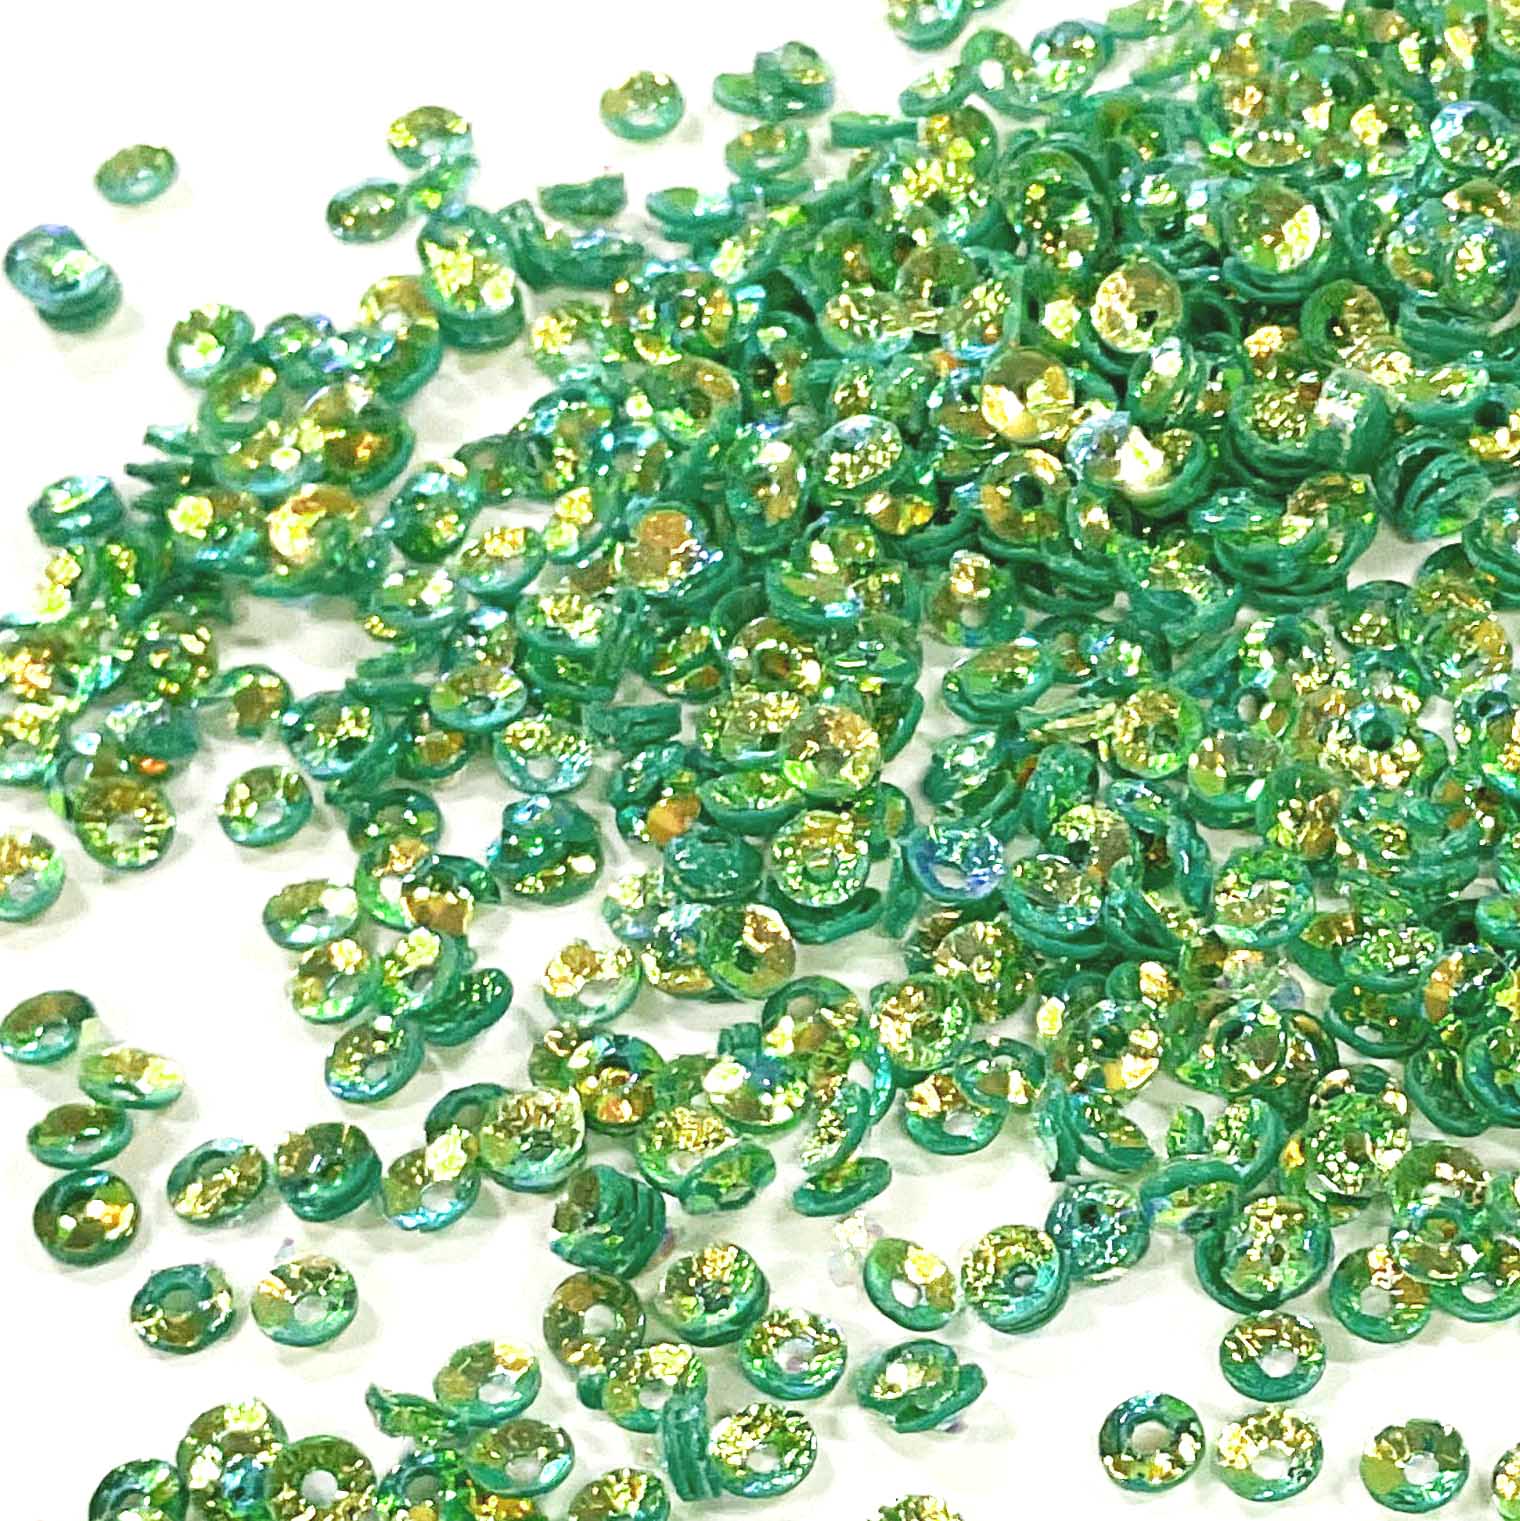 www.colourstreams.com.au Colour Streams Sequins Embellishments Costumes Mardi Gras Dancing Ballet Theatre Shows Drag Queen Bling S104 Cup Circle Shape Bright Green Yellow Lights Iridescent Greens 3mm